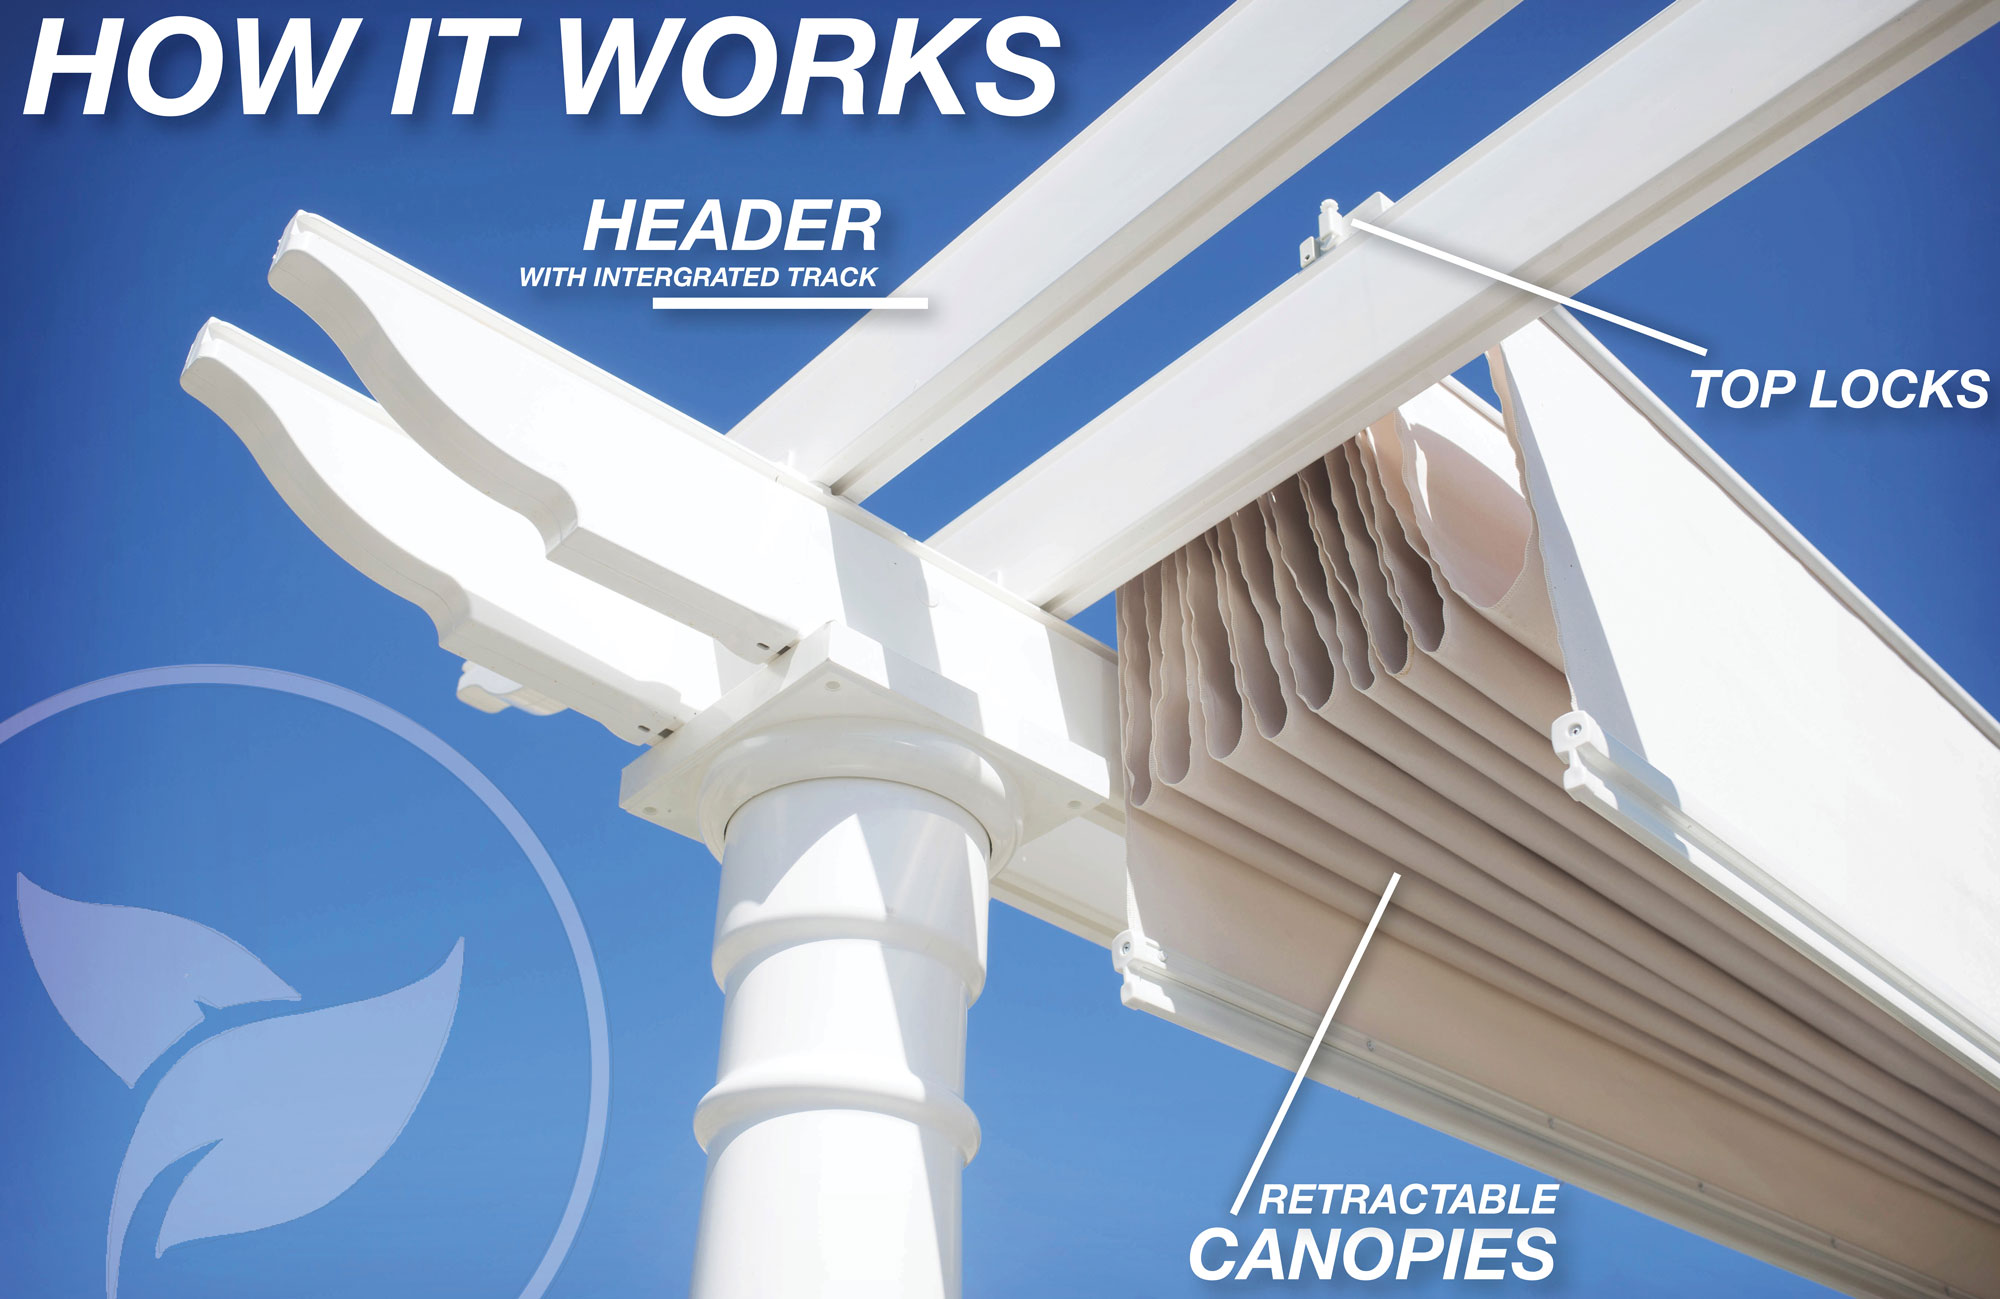 Canopy Gutter System - bridge the gap between two Instant Canopies